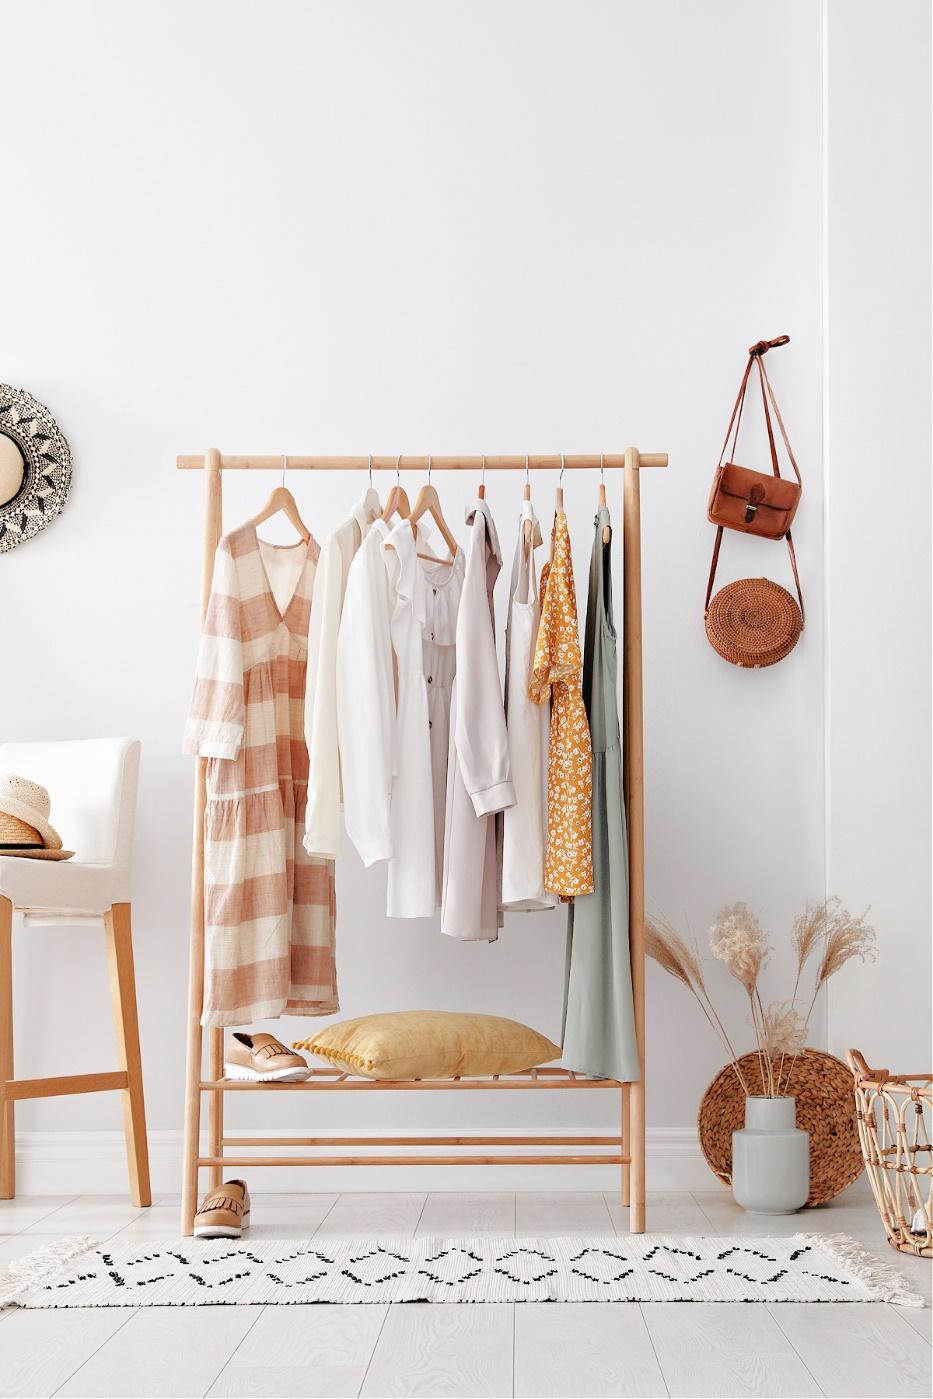 How to Build a Minimalist Wardrobe You ADORE in 10 Steps